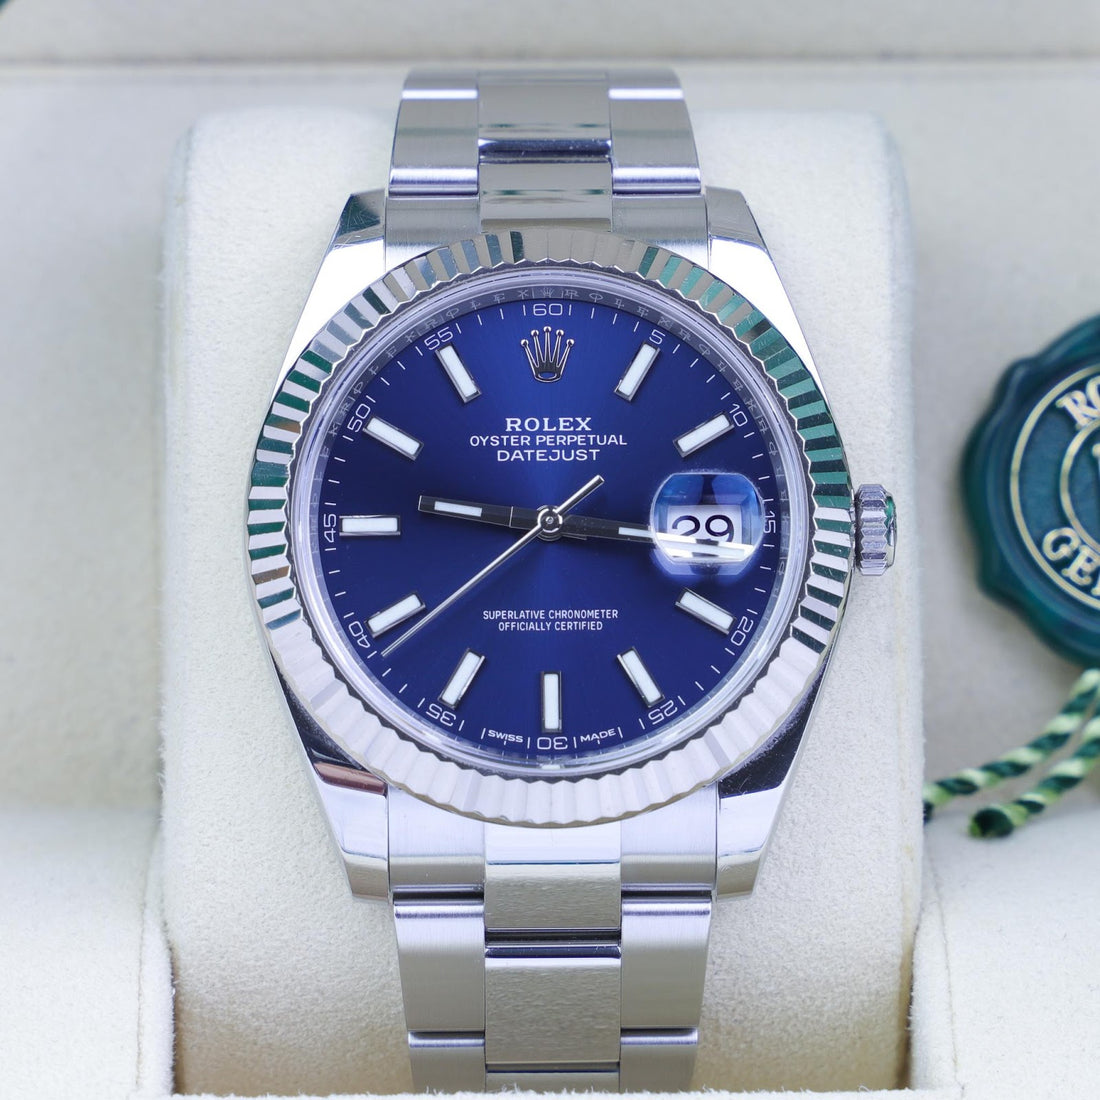 Are all Rolex Watches Automatic? Answered